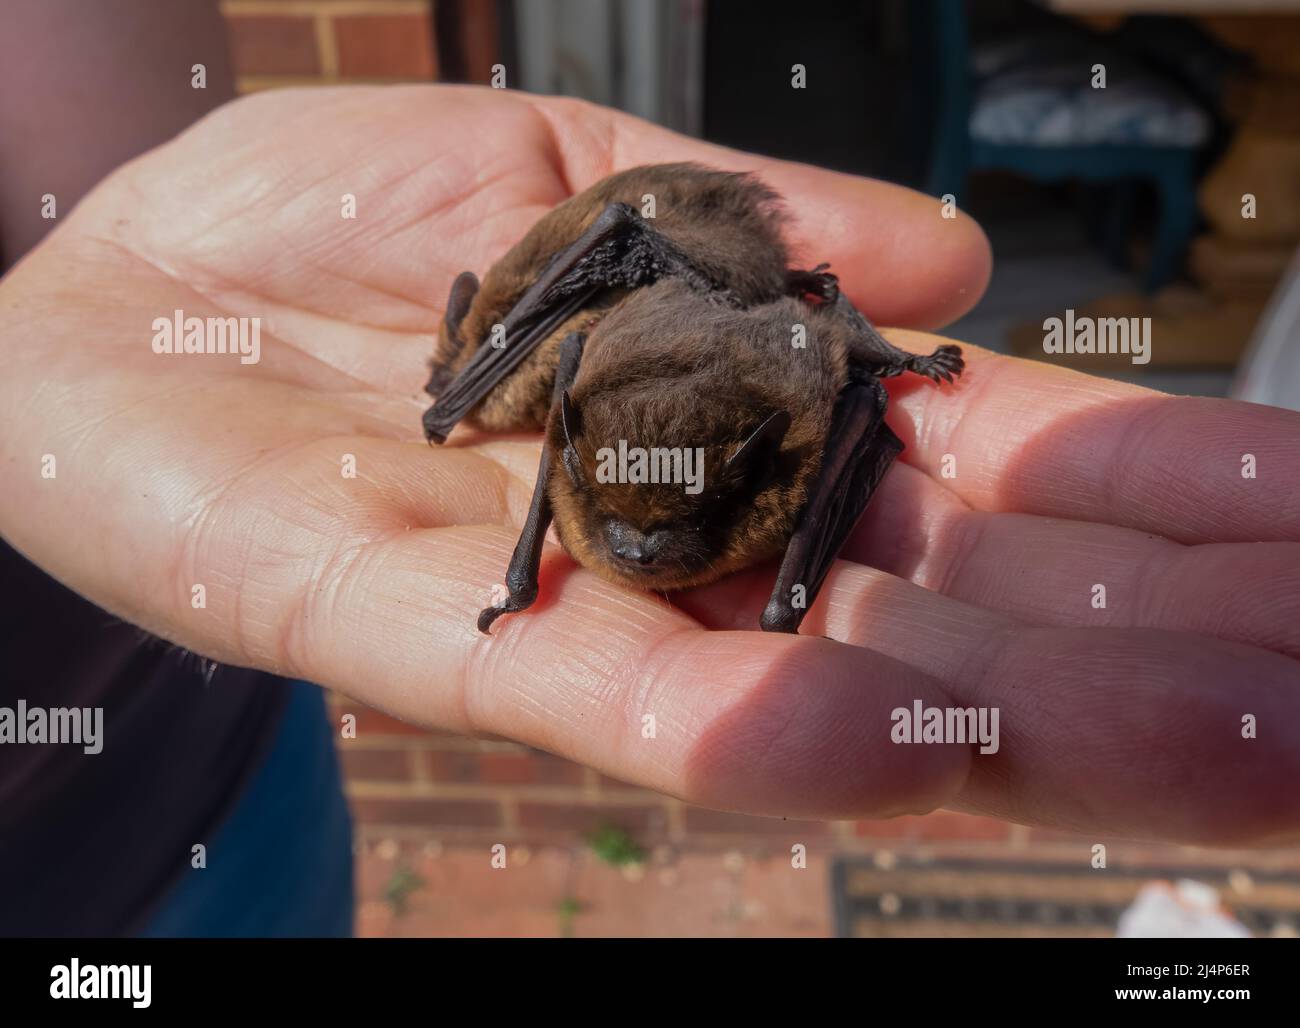 close up of a pair of common pipistrelle bats (Pipistrellus pipistrellus) size scaled by a human hand Stock Photo